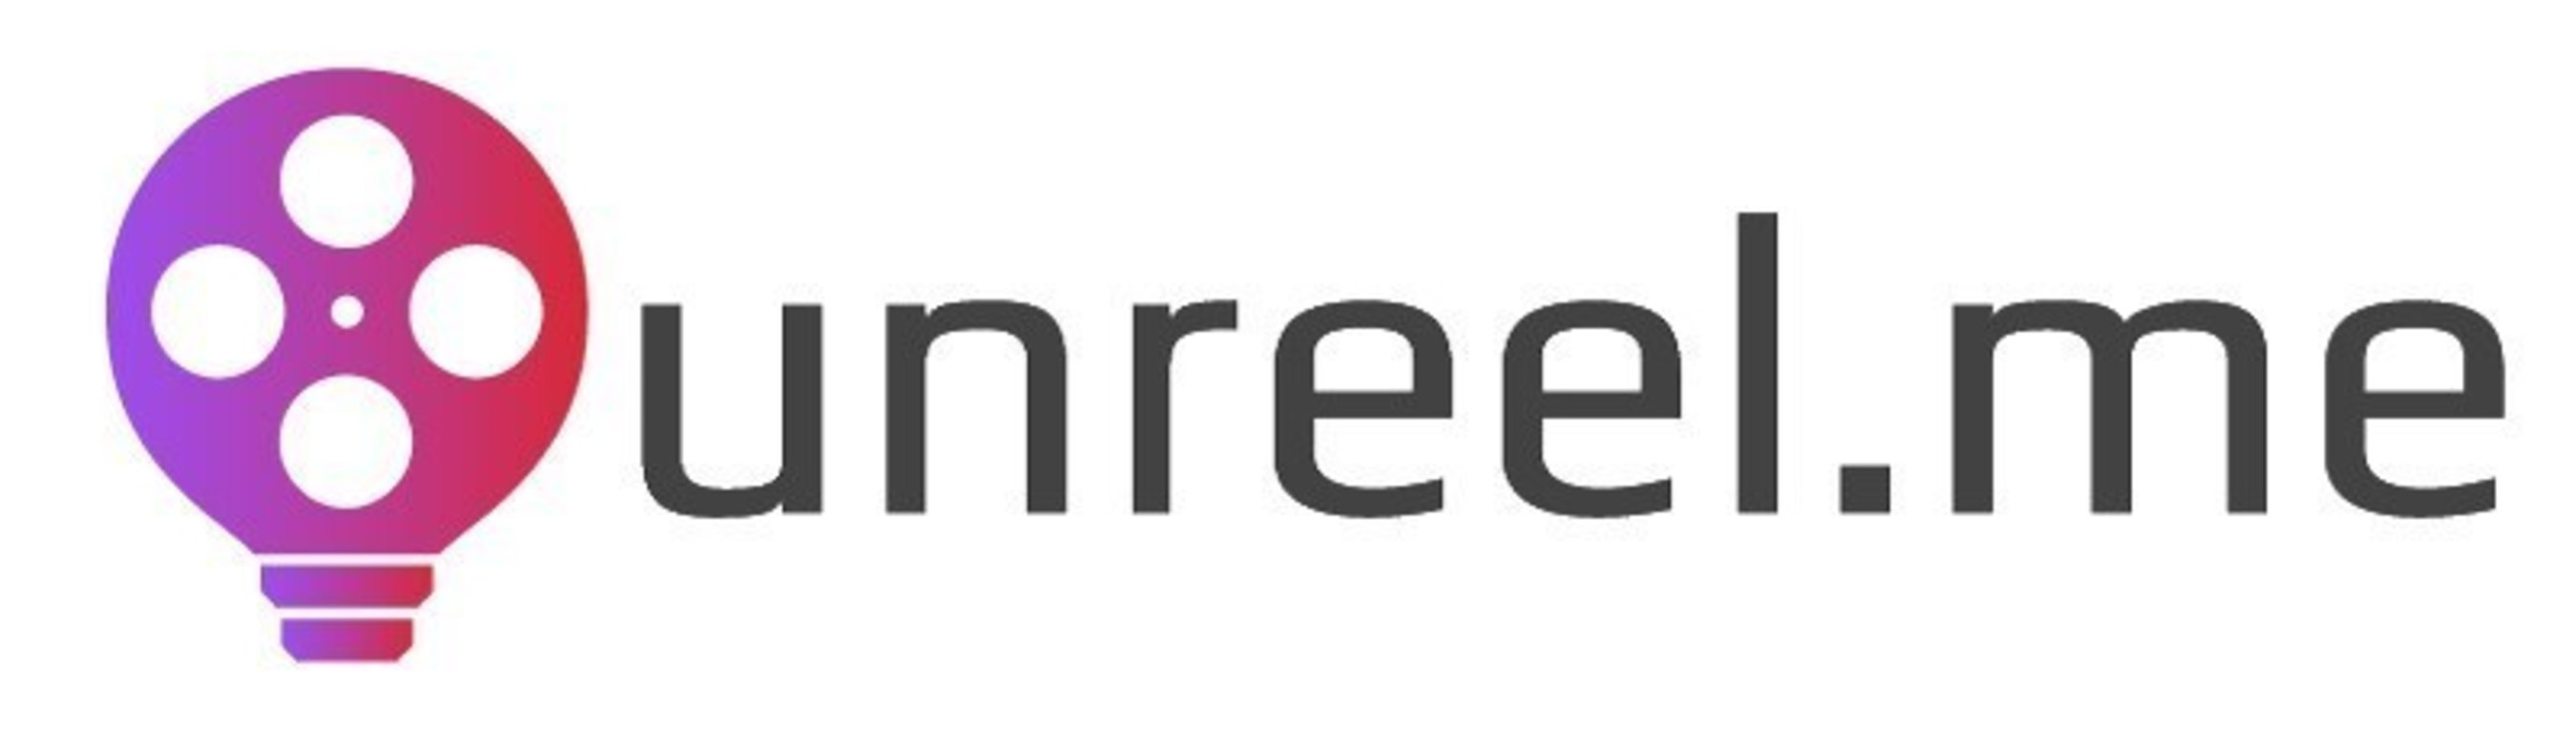 Unreel.me helps video creators and publishers instantly launch their own video streaming services & apps for free.